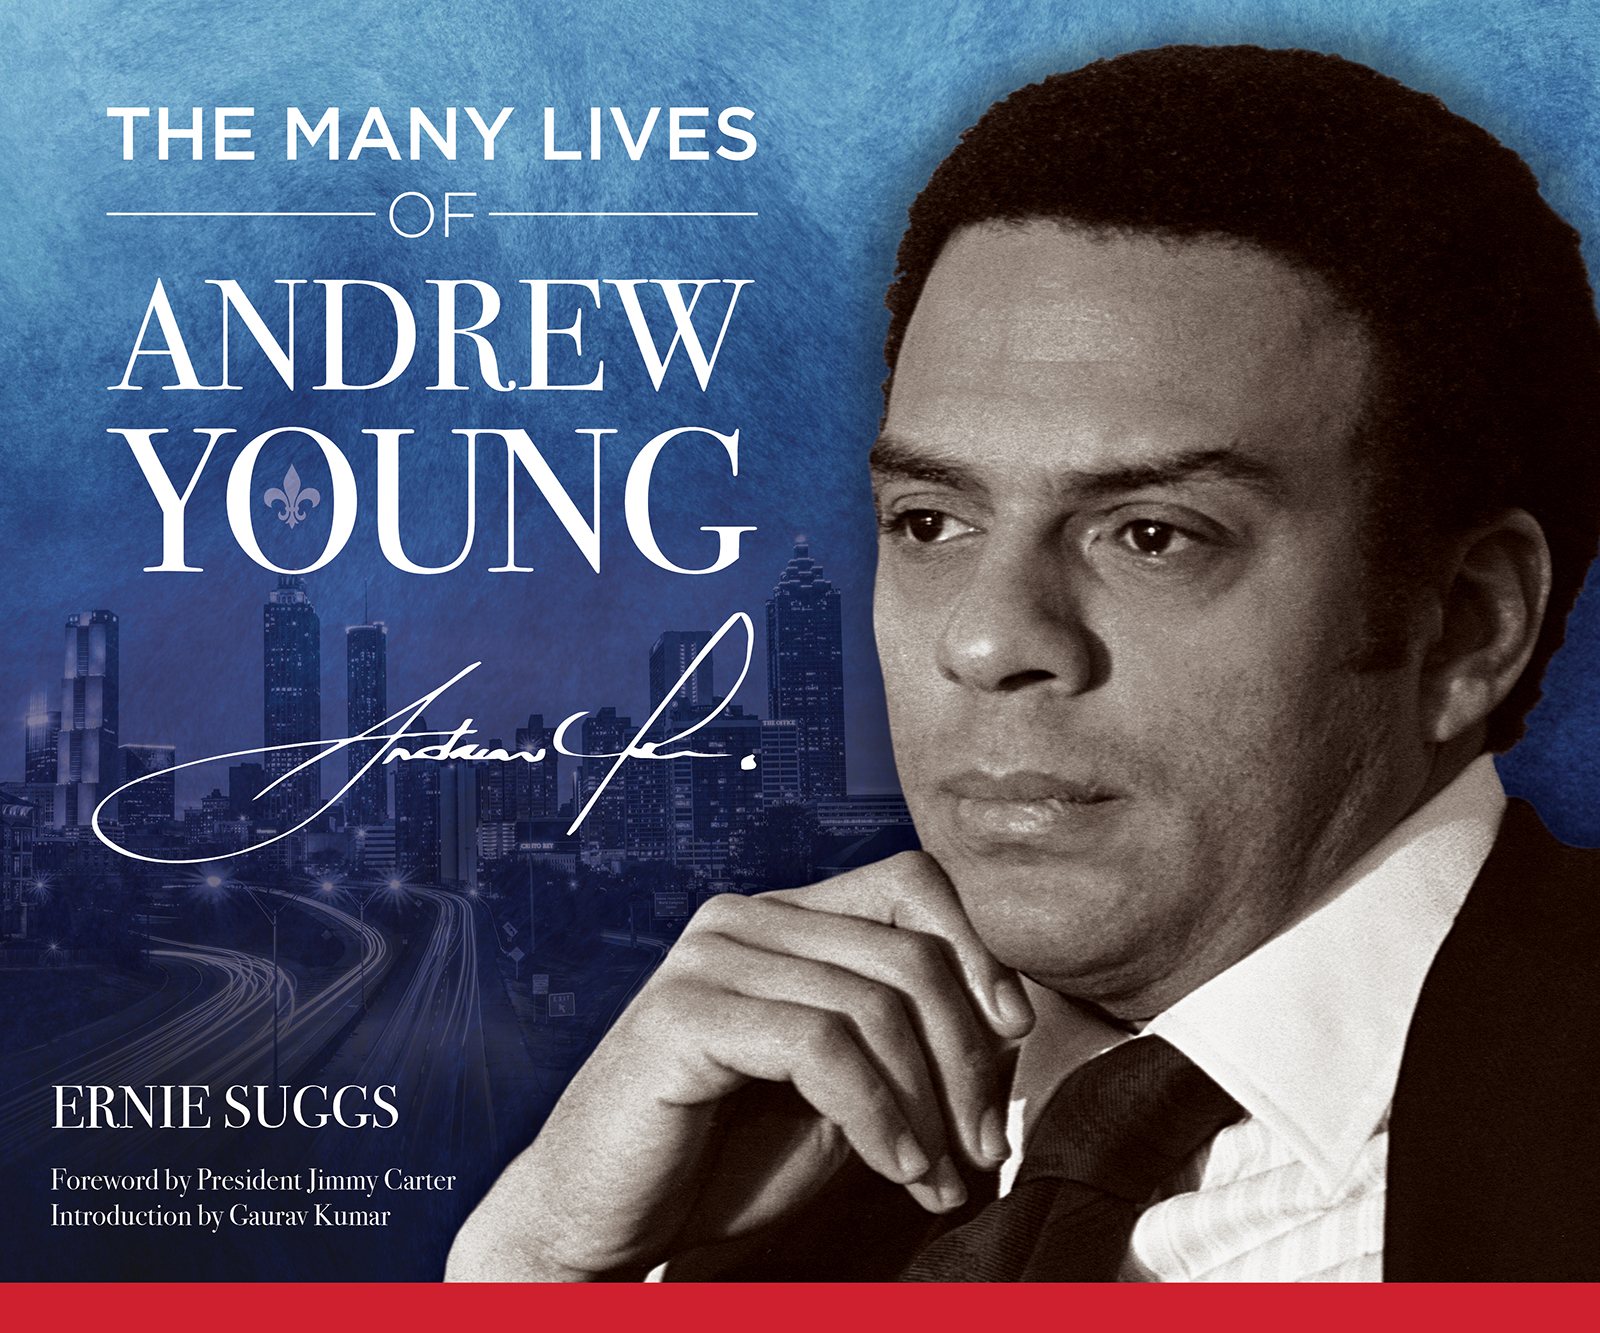 “The Many Lives of Andrew Young” by Ernie Suggs. Courtesy image